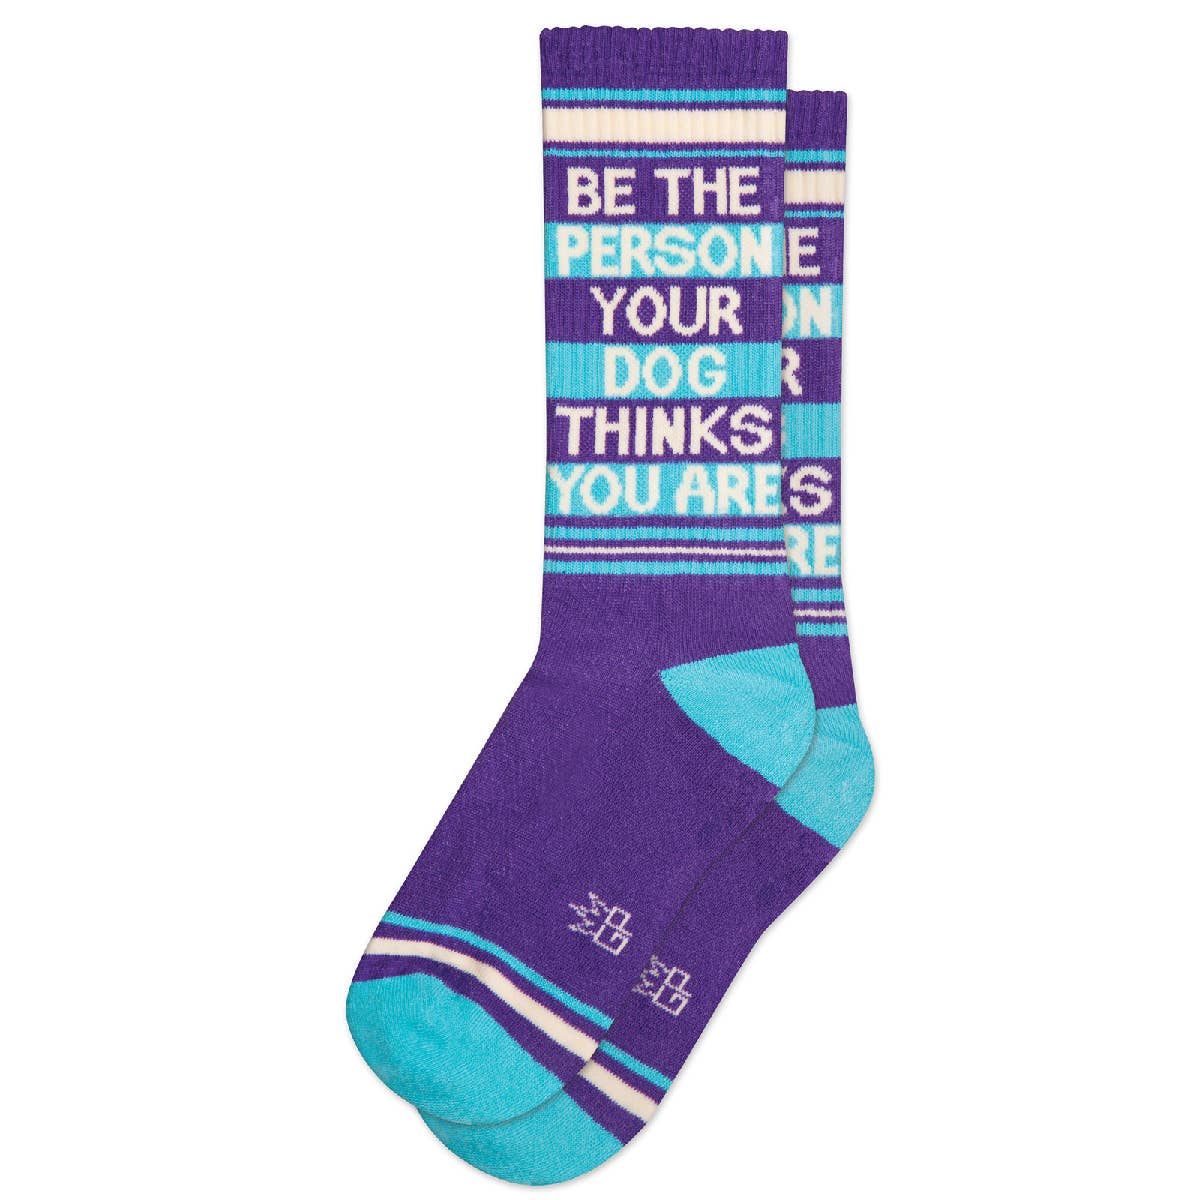 Be The Person Your Dog Thinks You Are Socks